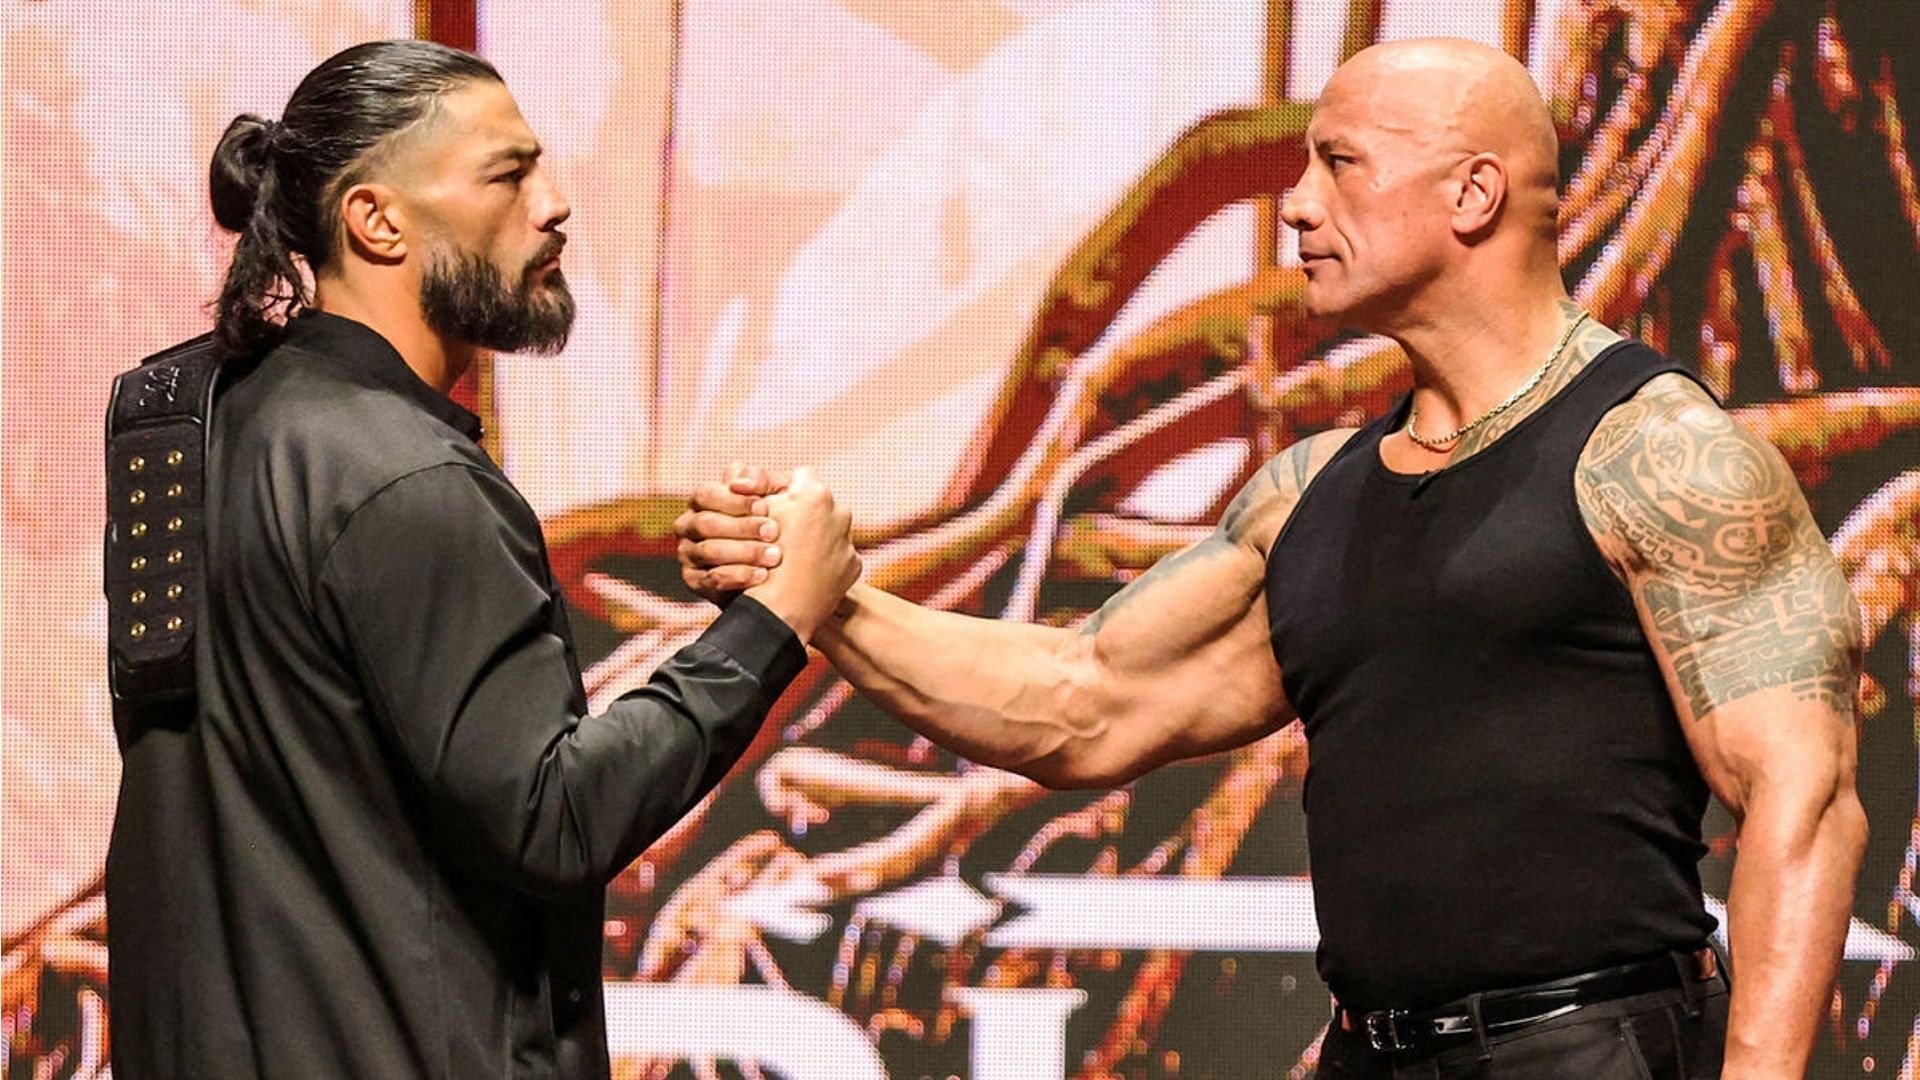 The alliance between Roman Reigns and The Rock could end badly for the Tribal Chief, says WWE Hall of Famer.